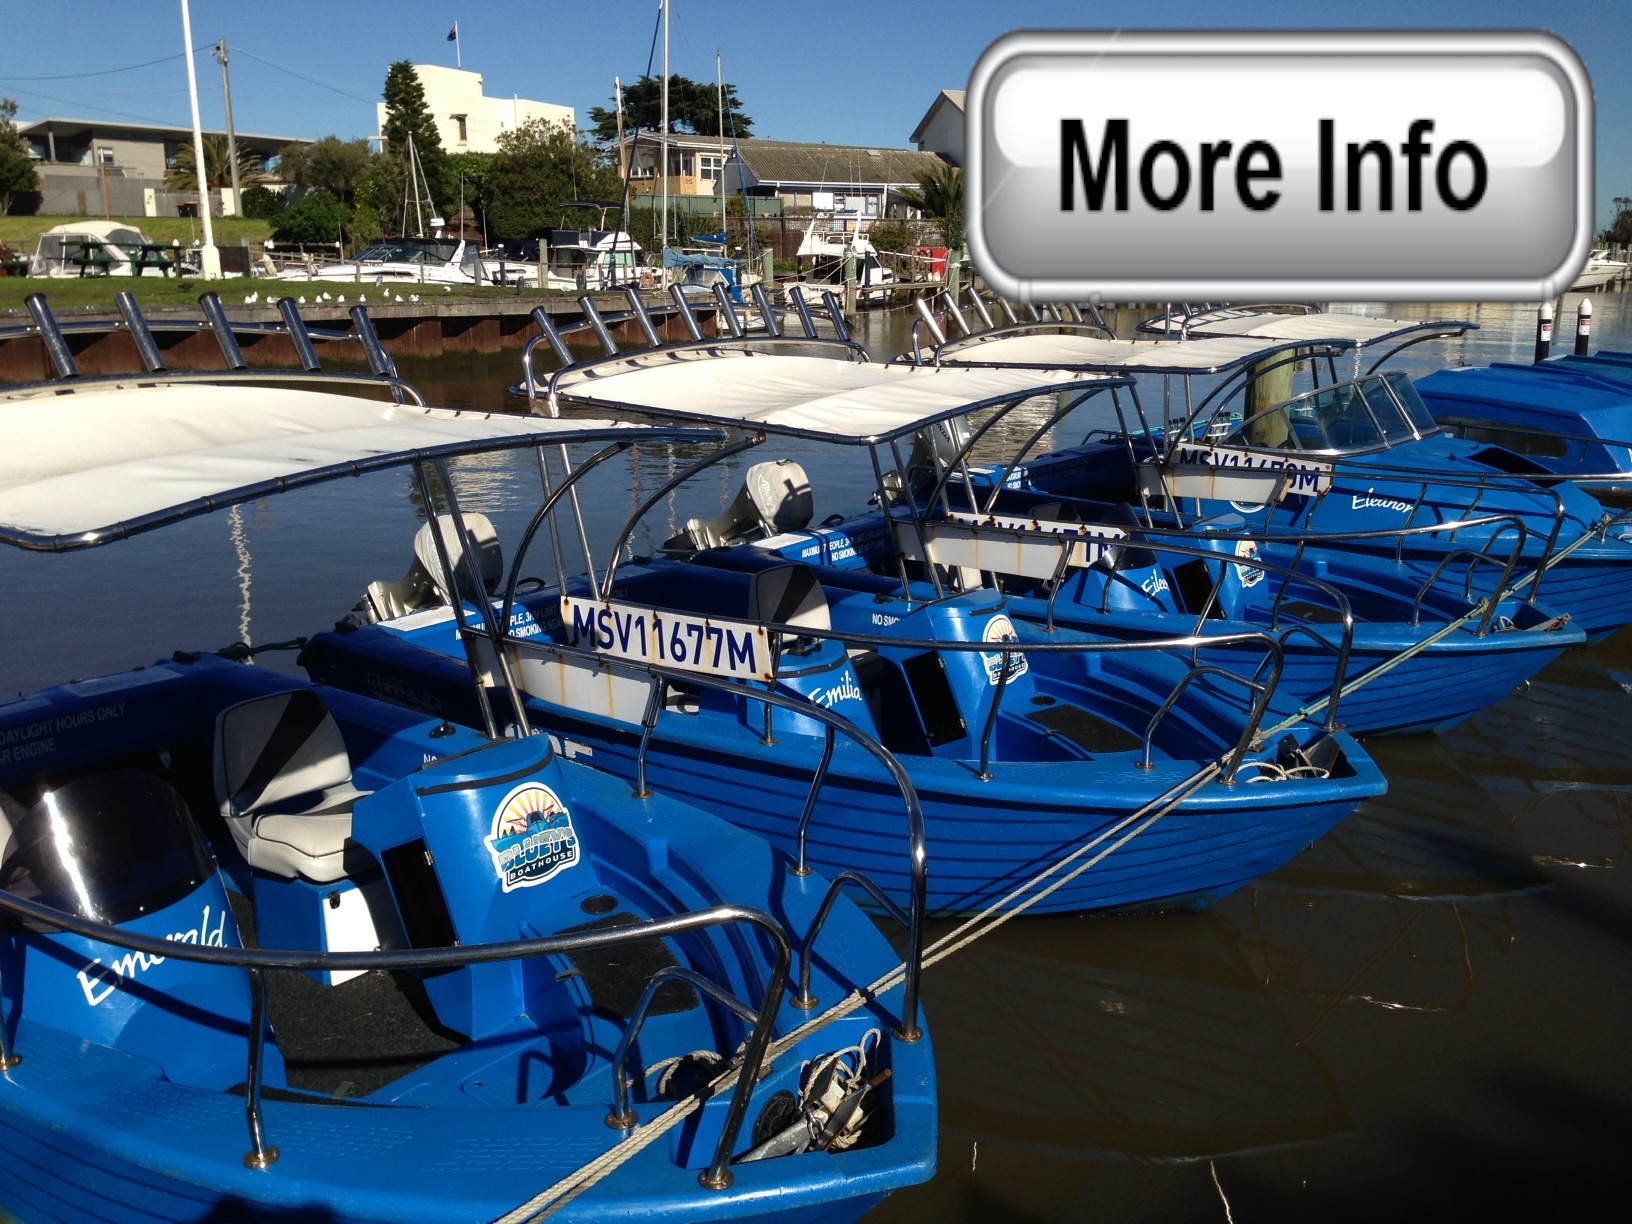 "SUPERFISH" 5 Hour Hire - Extreme Boat, **Faster, Whisper Quiet, Fantastic Features**